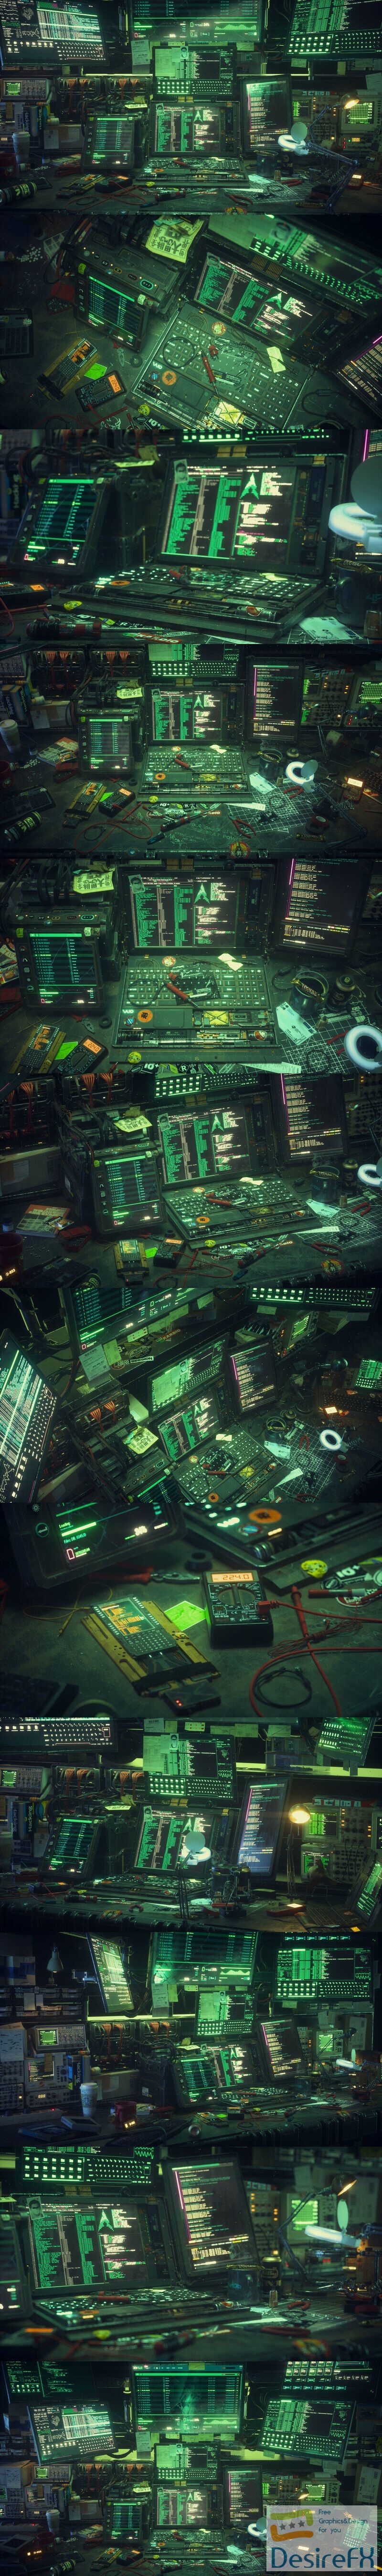 Hacking Workspace Scene C4d and Octane